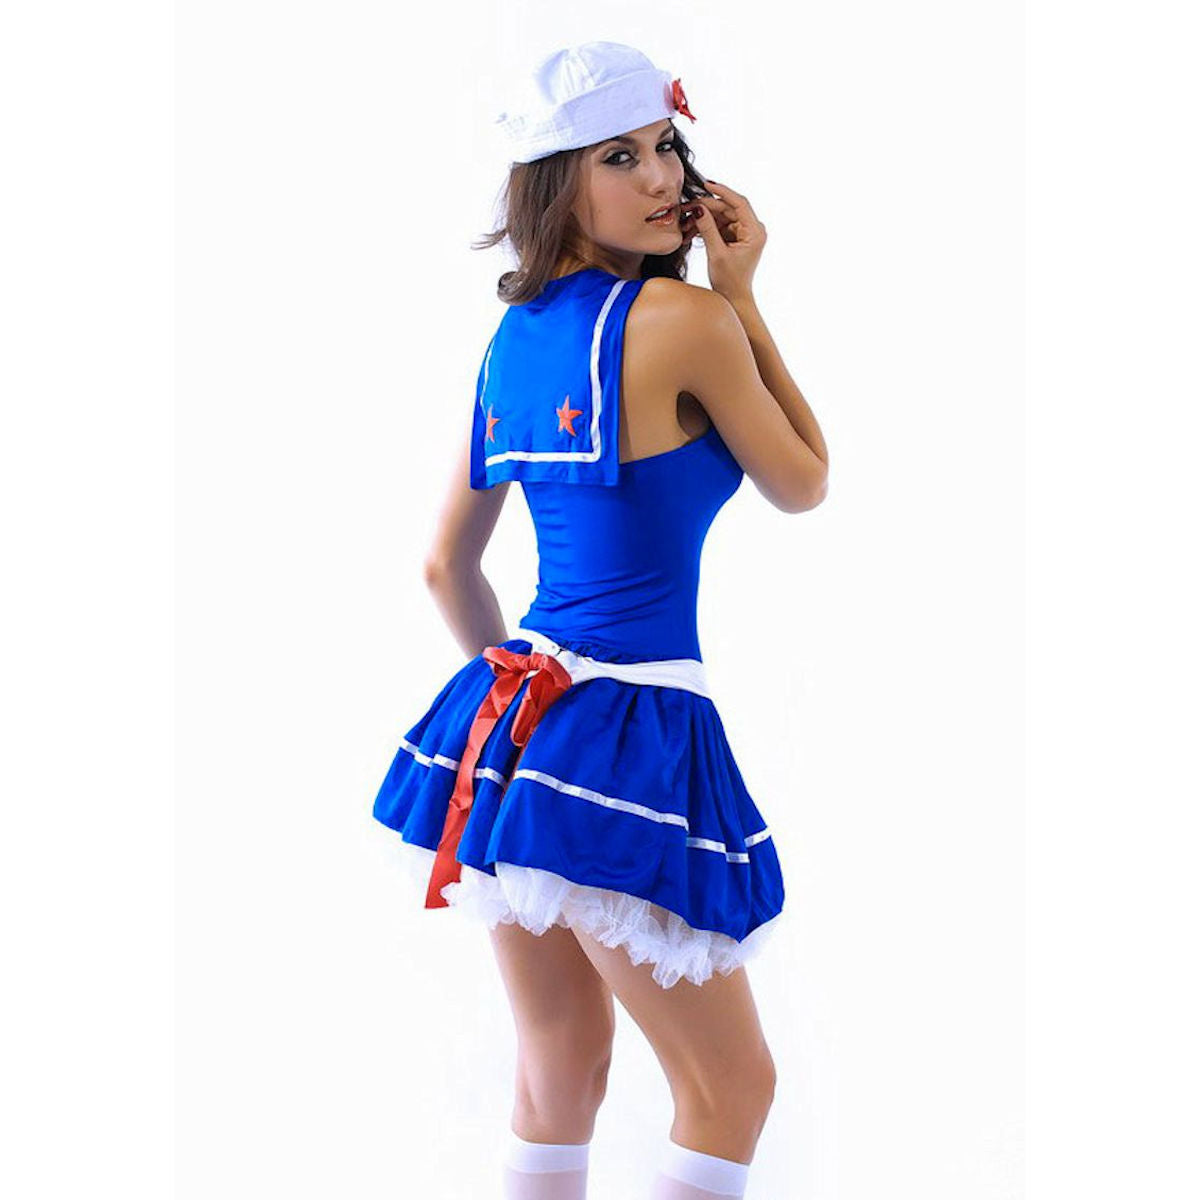 Sailor Blue Costume Women's fancy dress costume with Hat one size fits 8-12